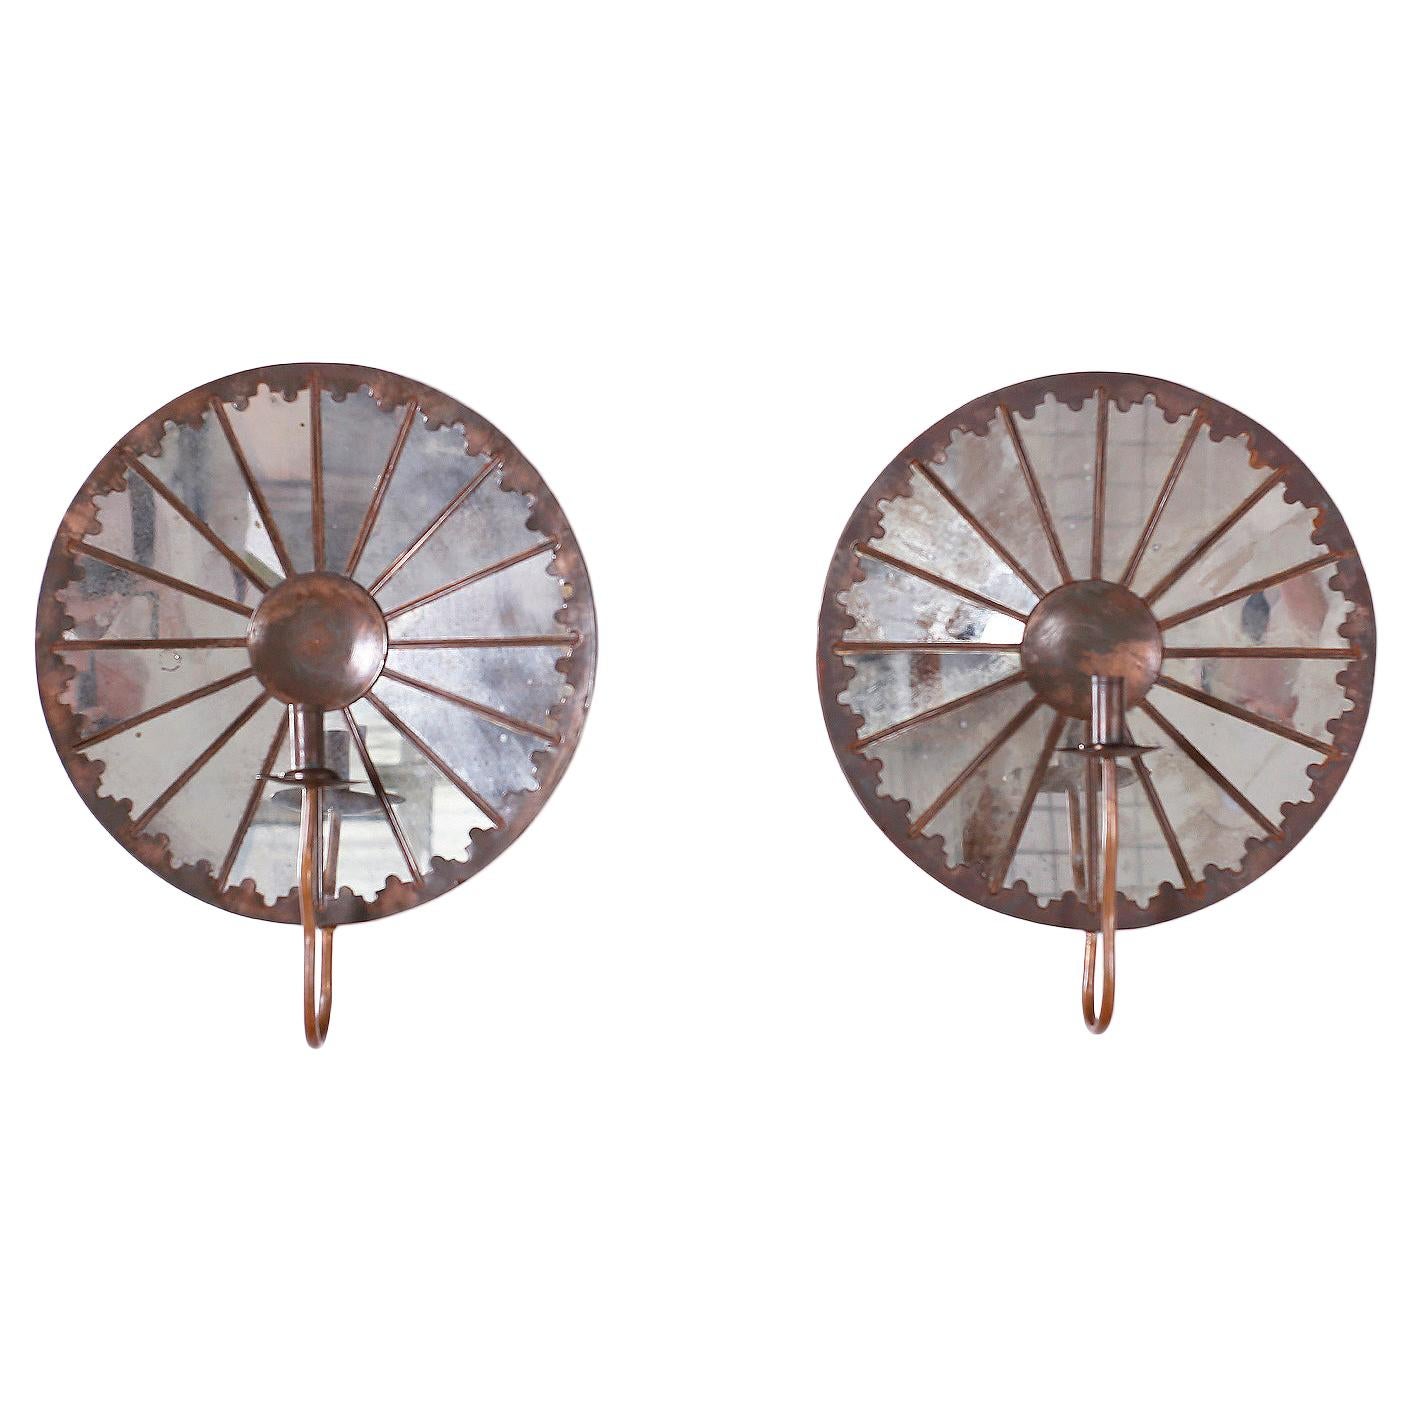 Pair of Mirrored and Copper Wall Sconces